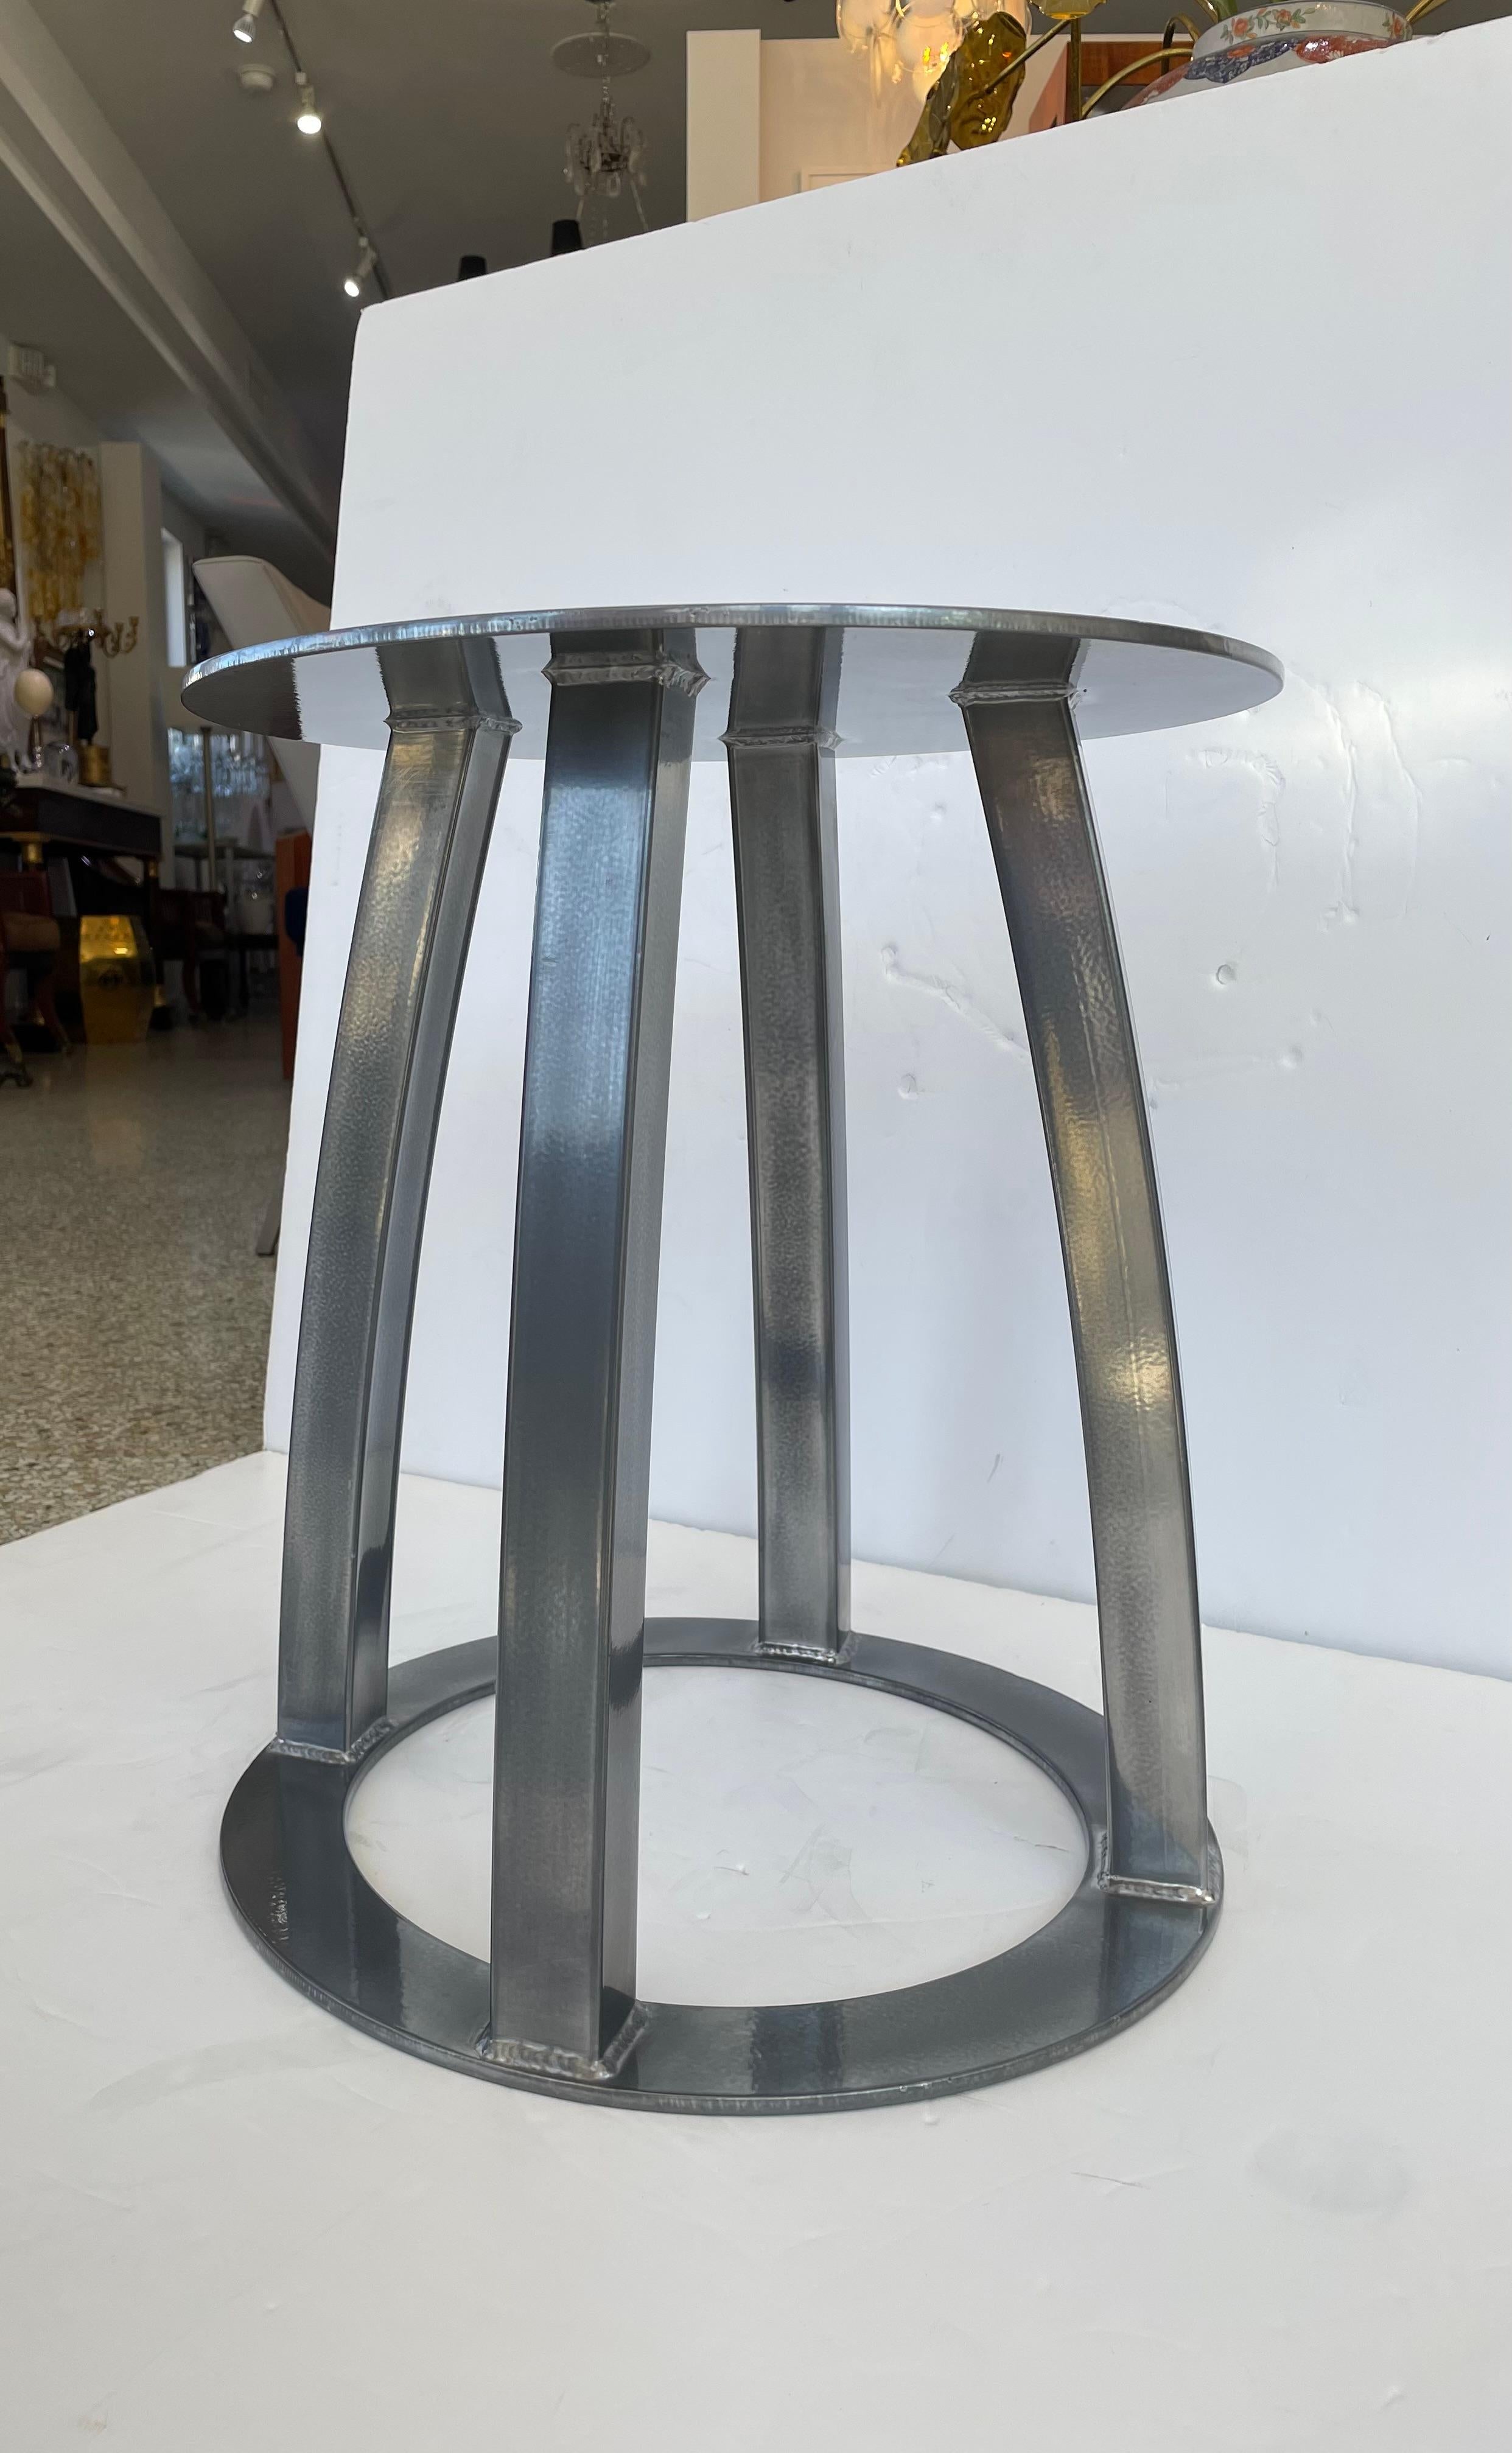 This stylish and chic handcrafted, artisan side table is fabricated in steel and finished in a custom gunmetal, dark pewter finish.

Note: The finish has a slight orange peel texture to it that catches the light beautifully. 